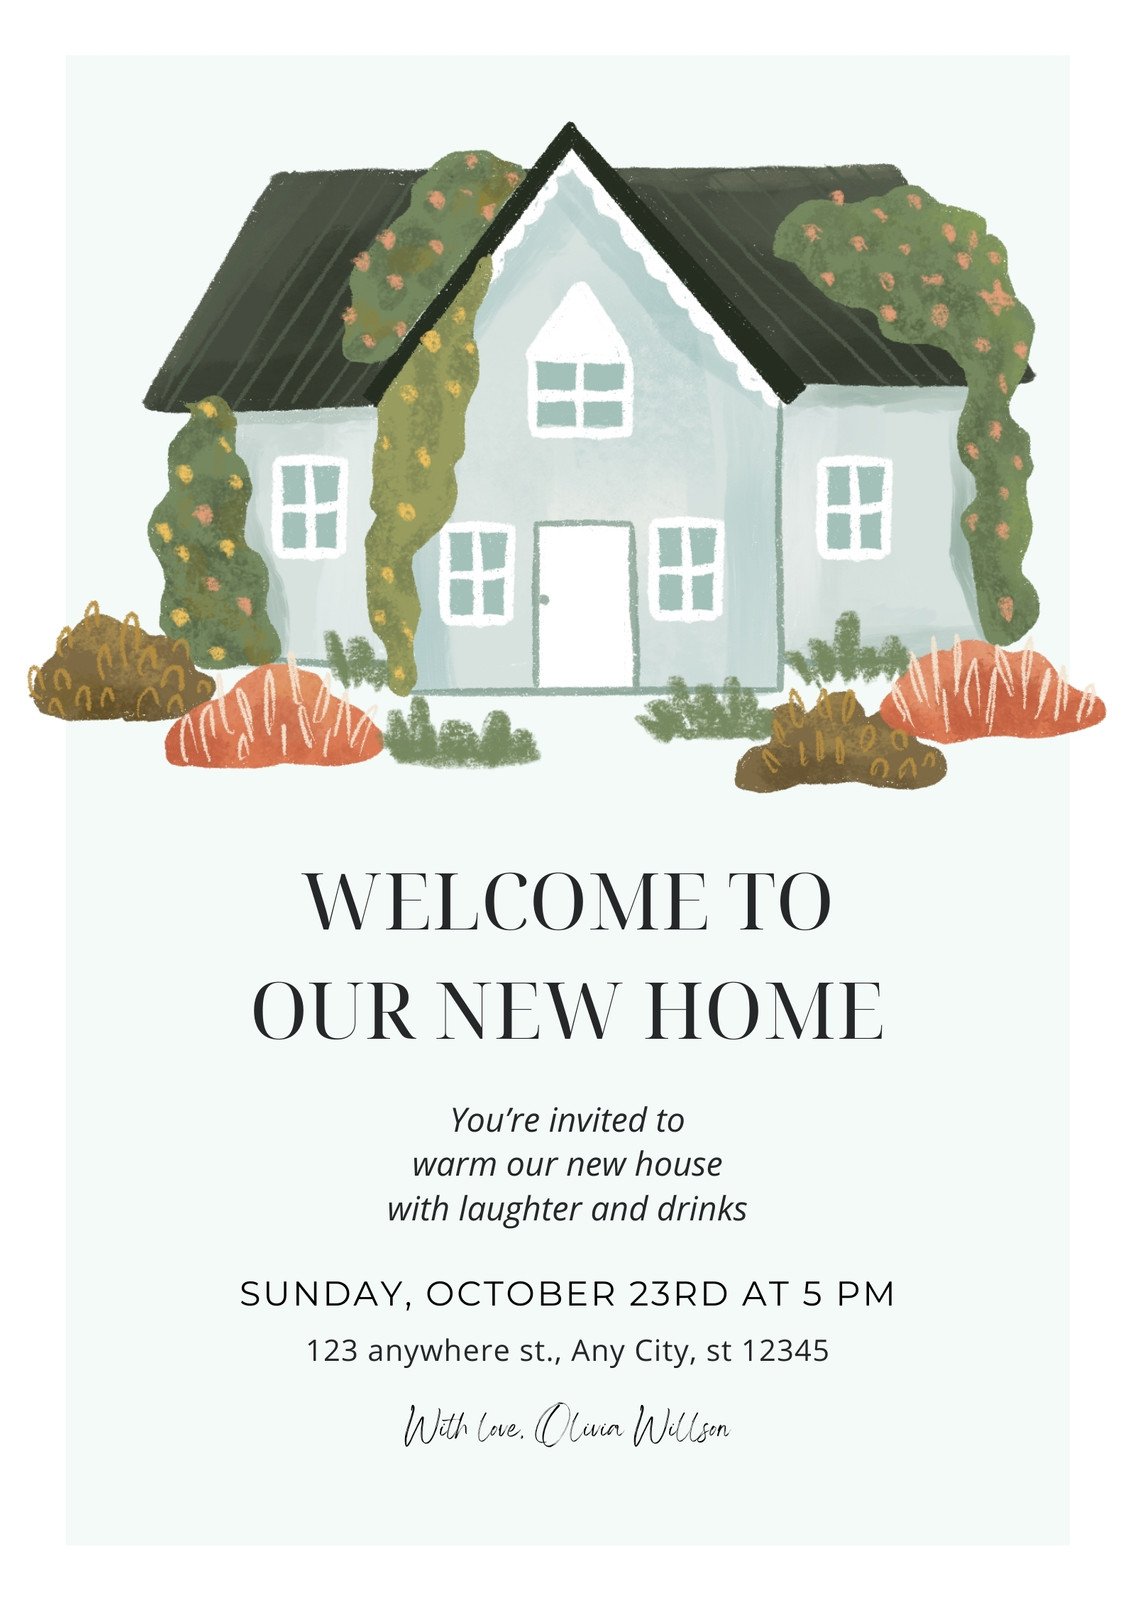 House warming party invitations